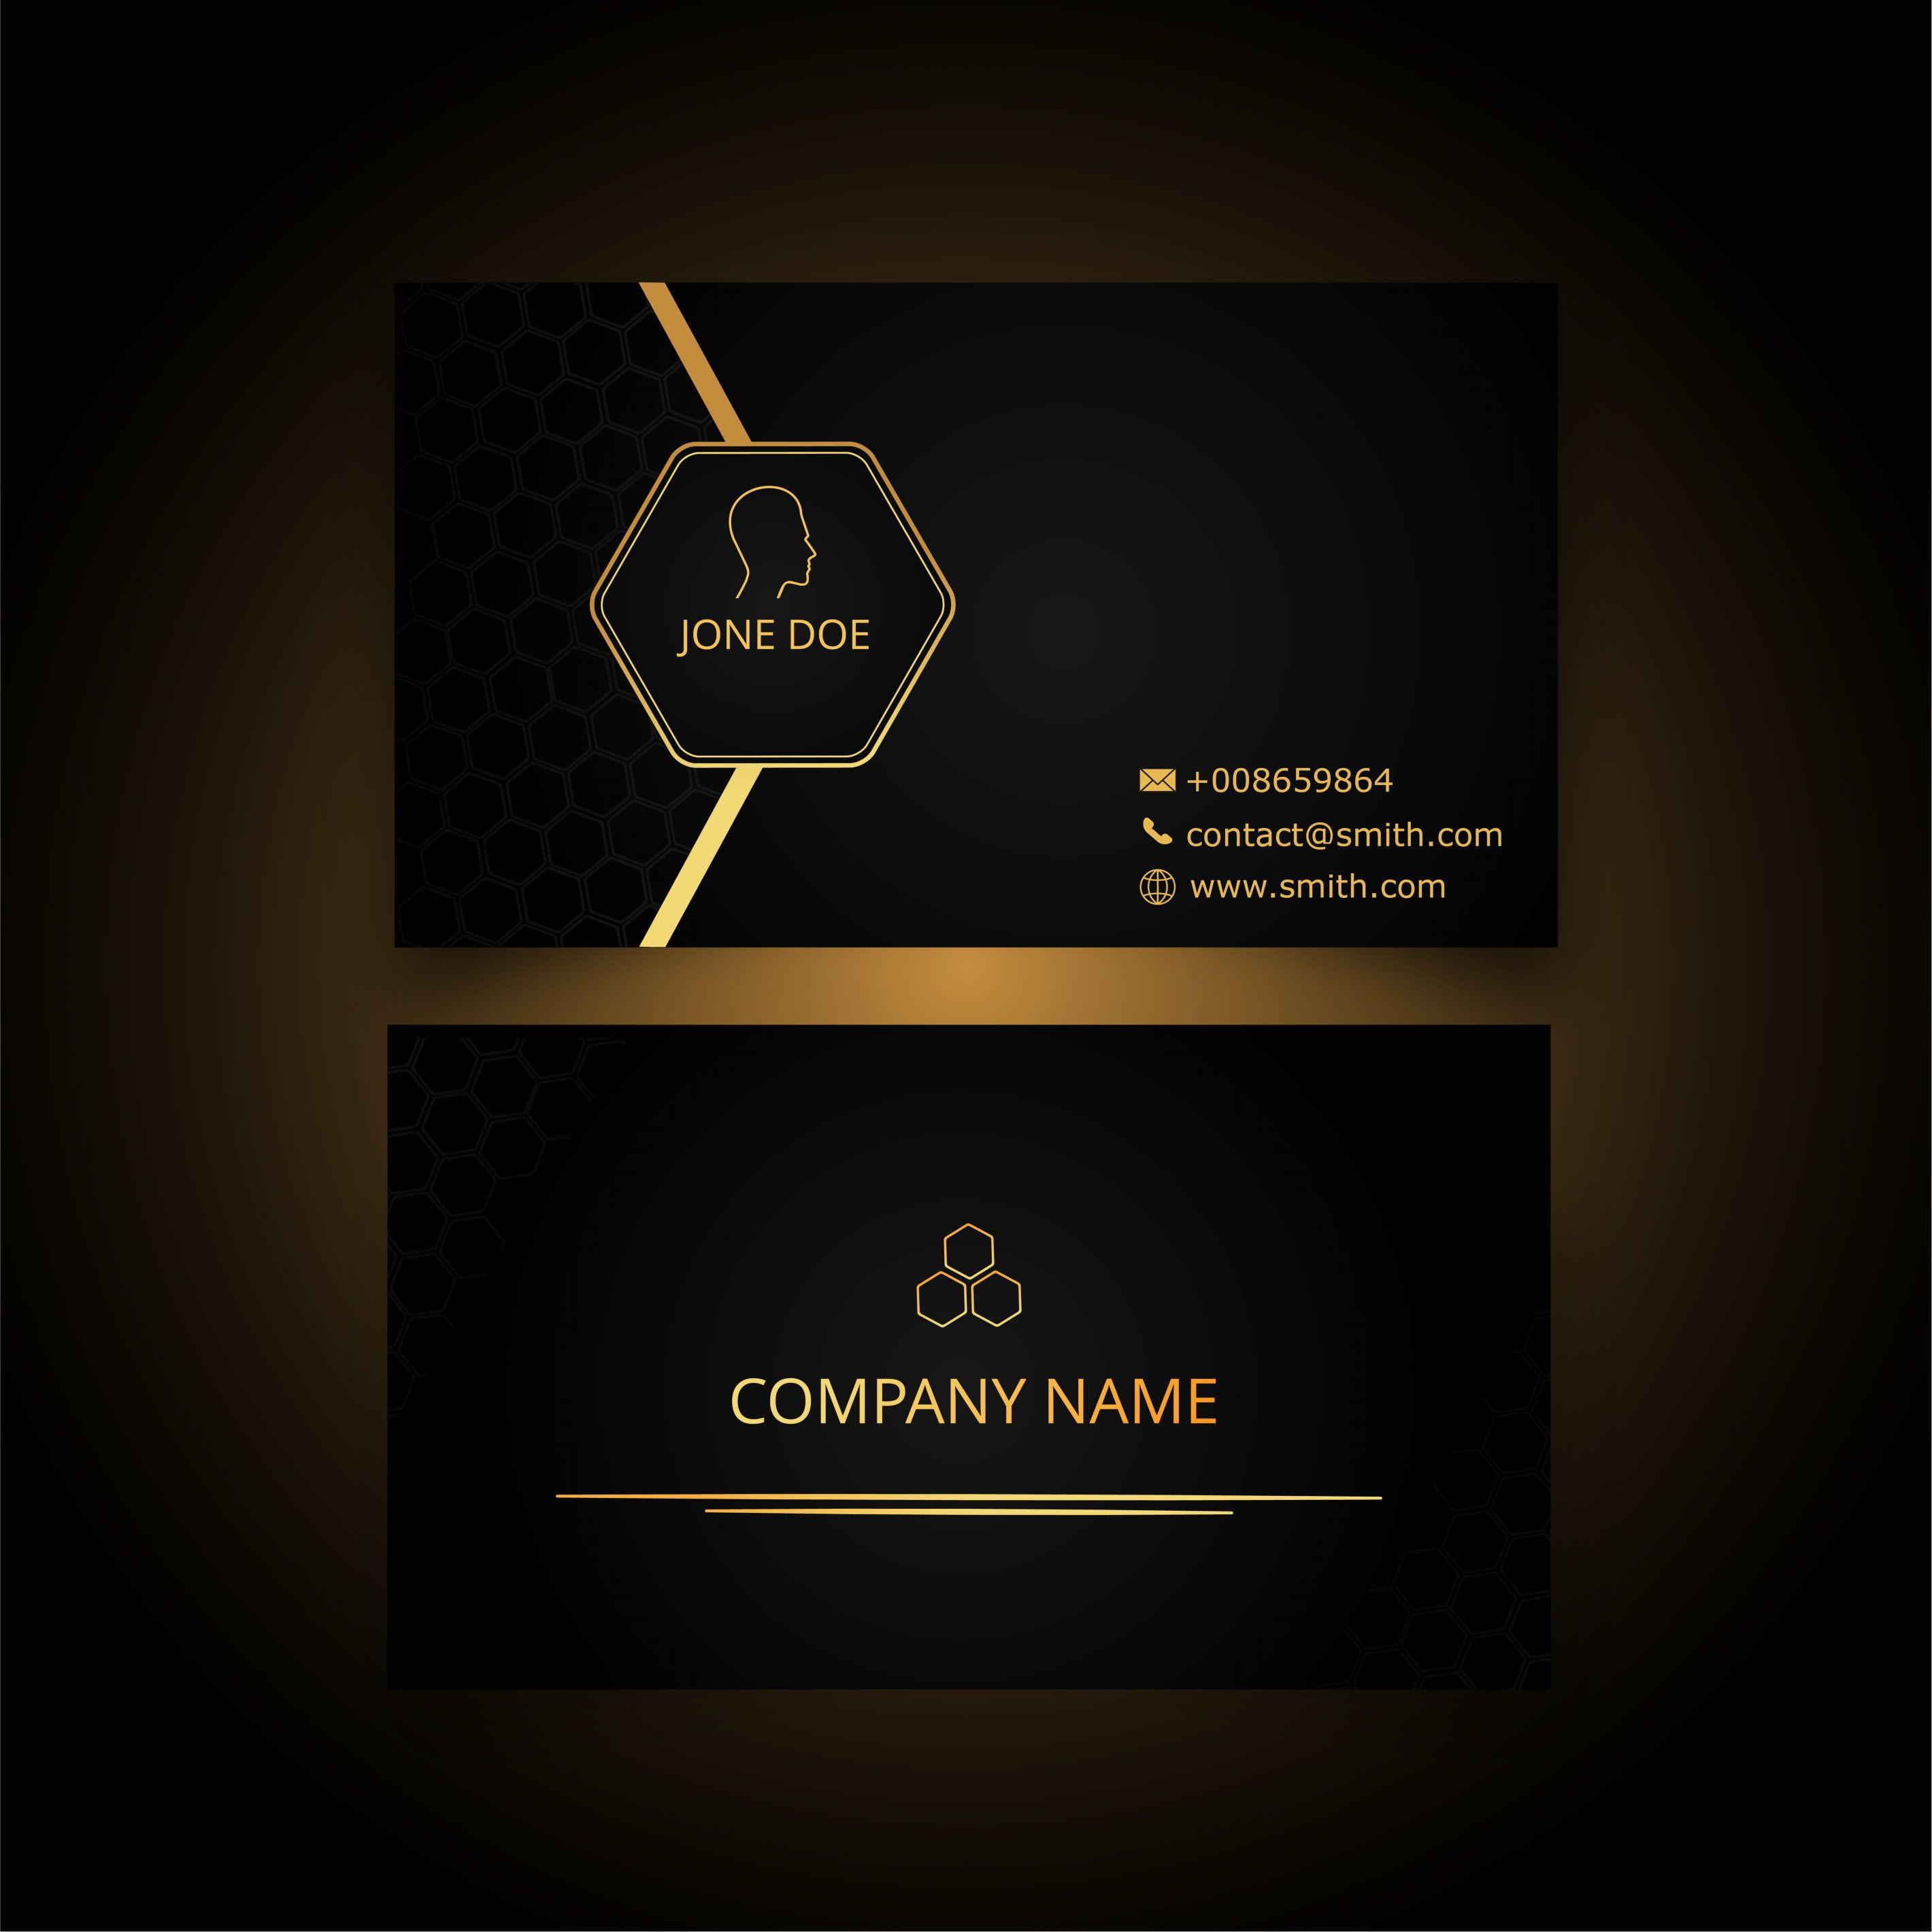 Modern Business Card Template Available On Freepik Of Design Business Card Template